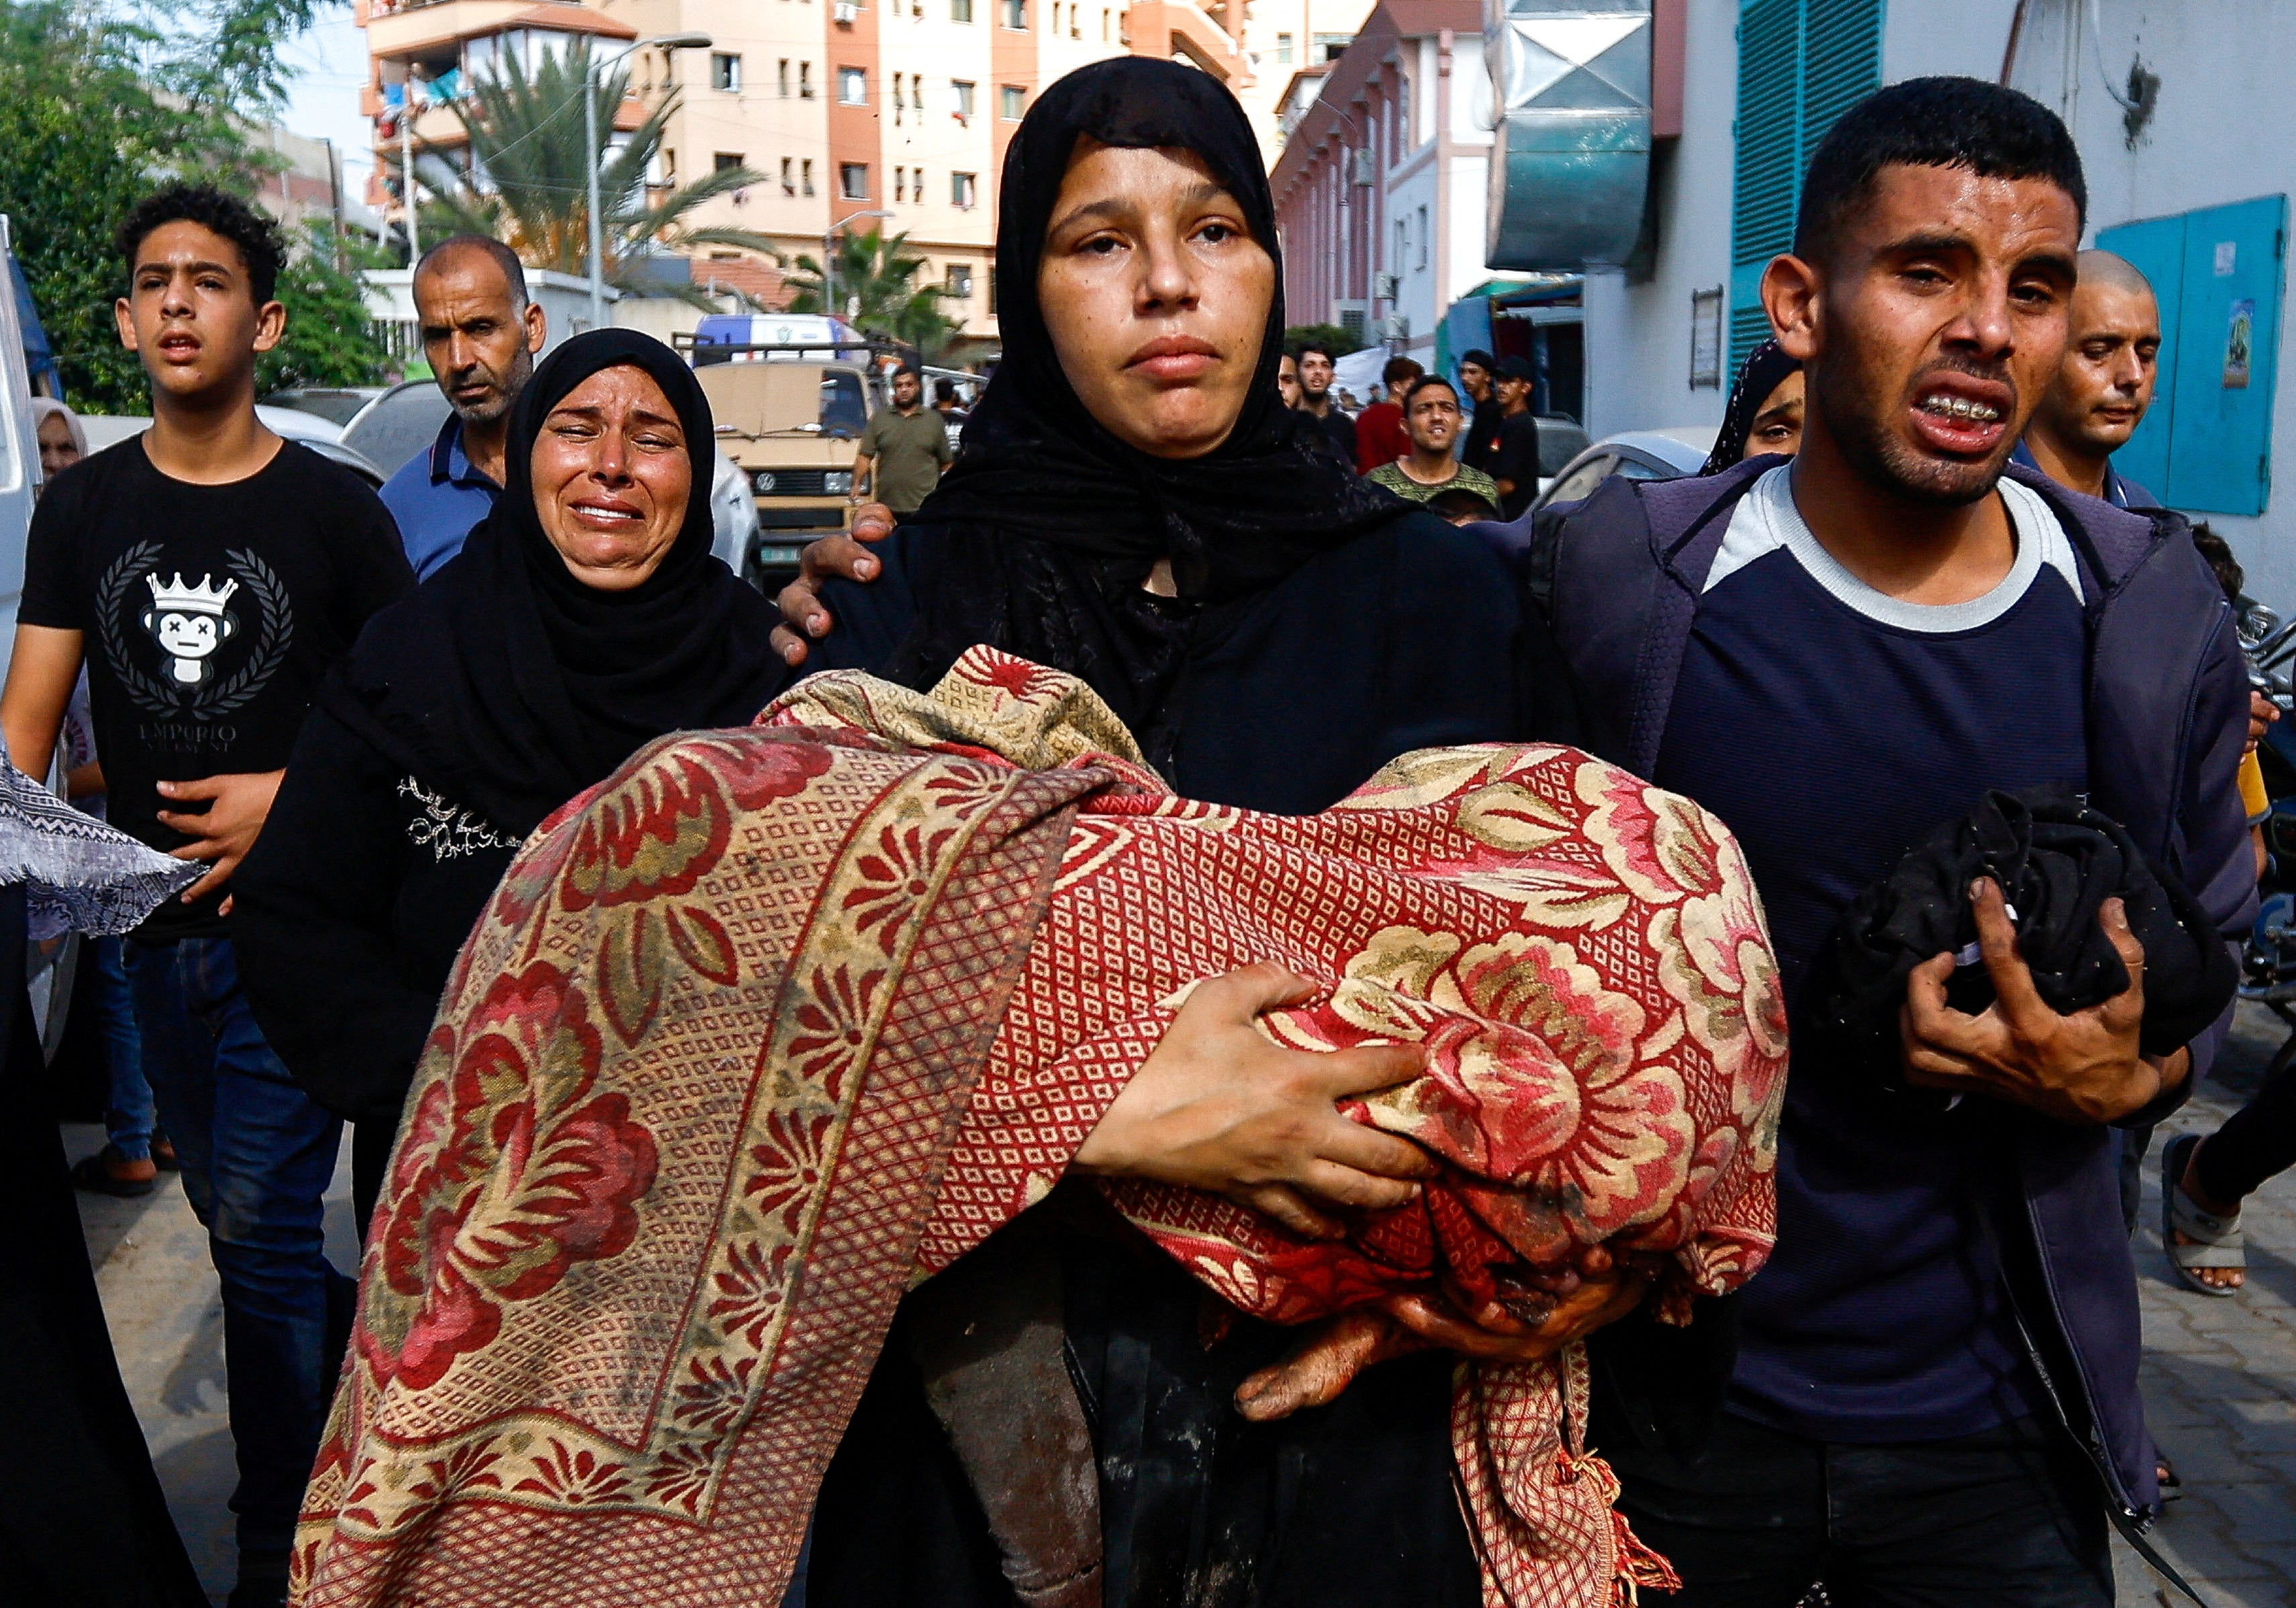 Women and children represent around 70 per cent of the deaths in Gaza since 7 October